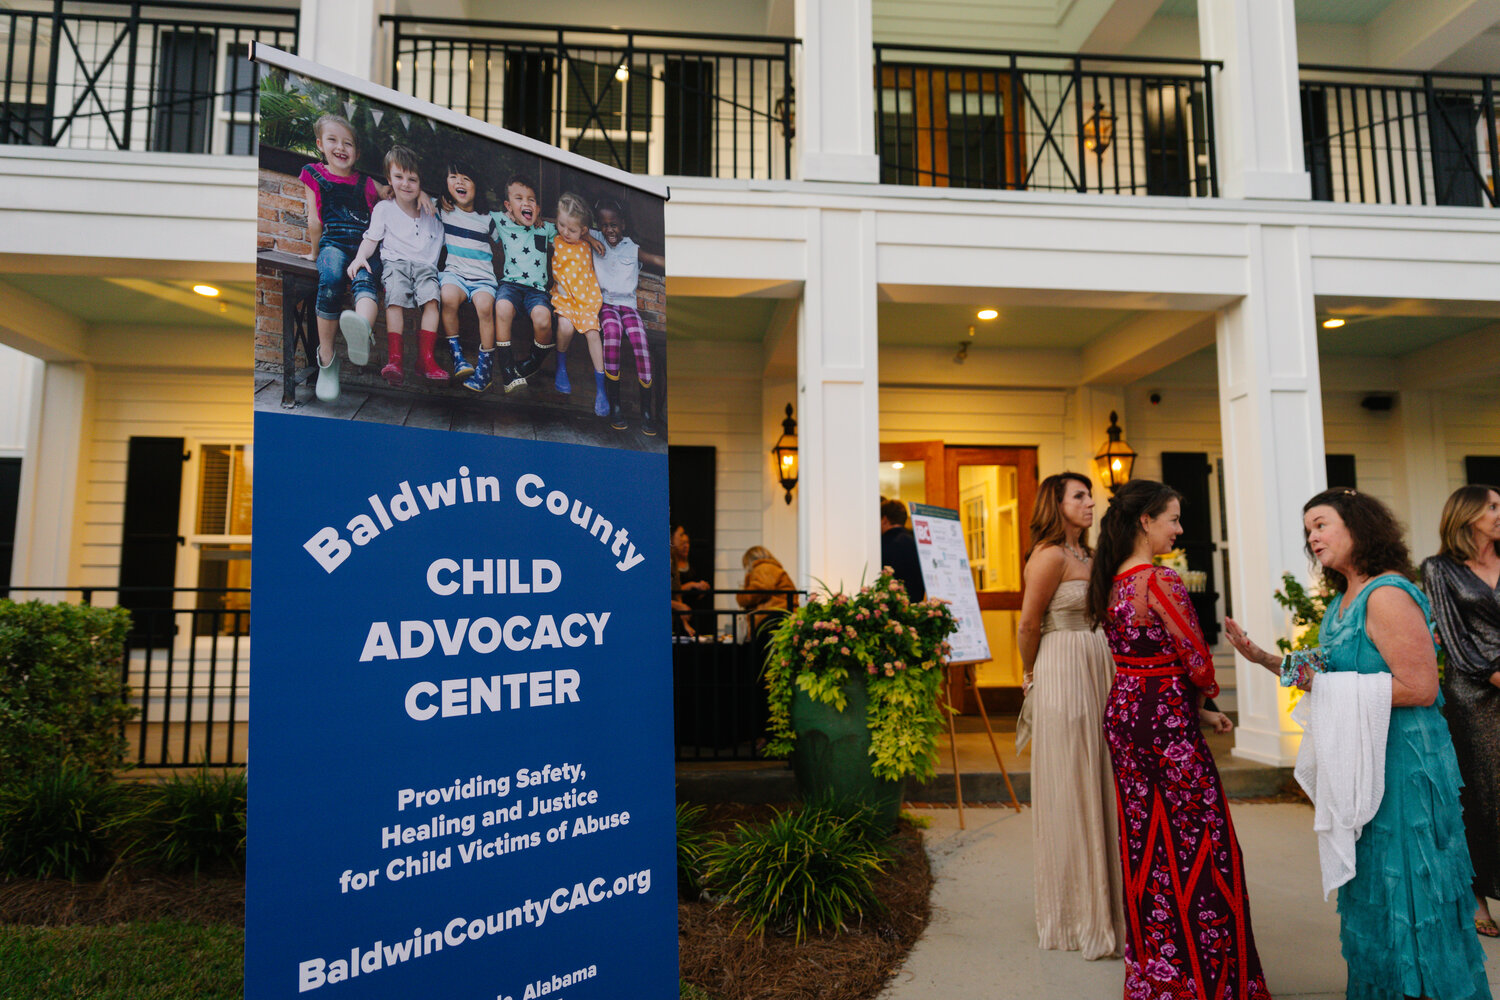 Attendees at the Baldwin County Child Advocacy Center inaugural Fall Ball hosted at the Coastal Arts Center on Nov. 2.